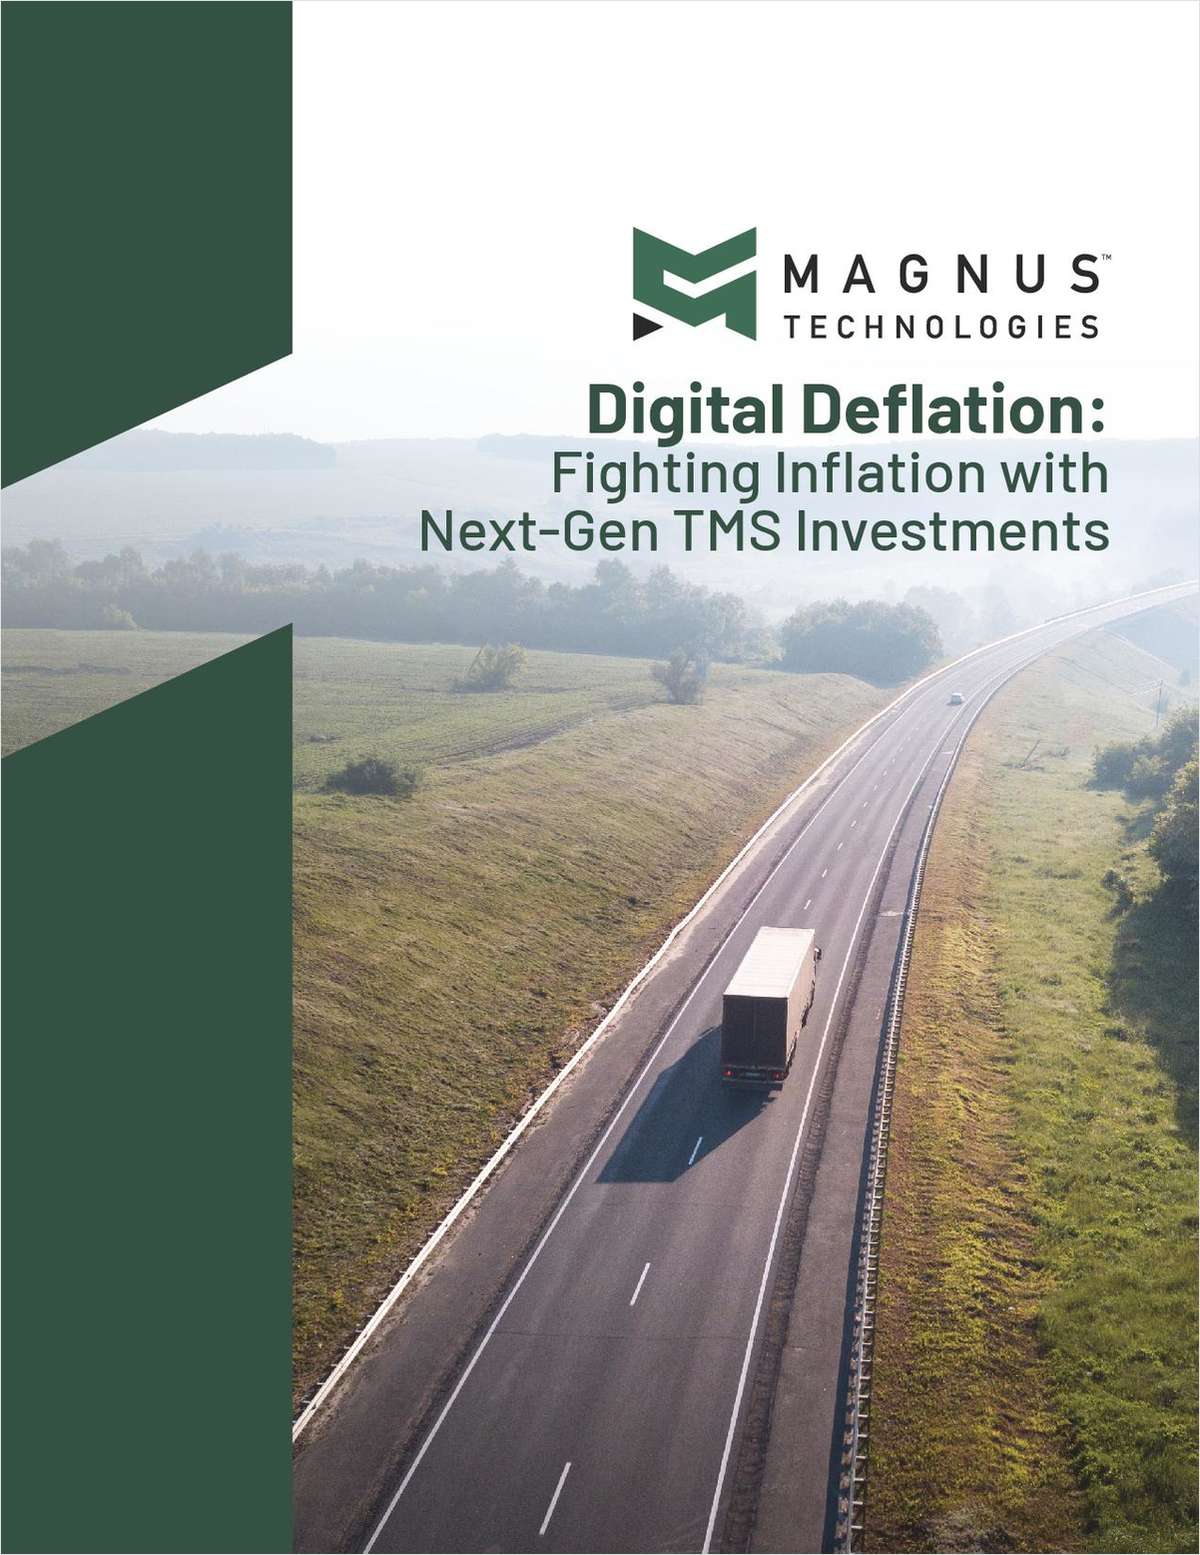 Digital Deflation: Fighting Inflation with Next-Gen TMS Investments